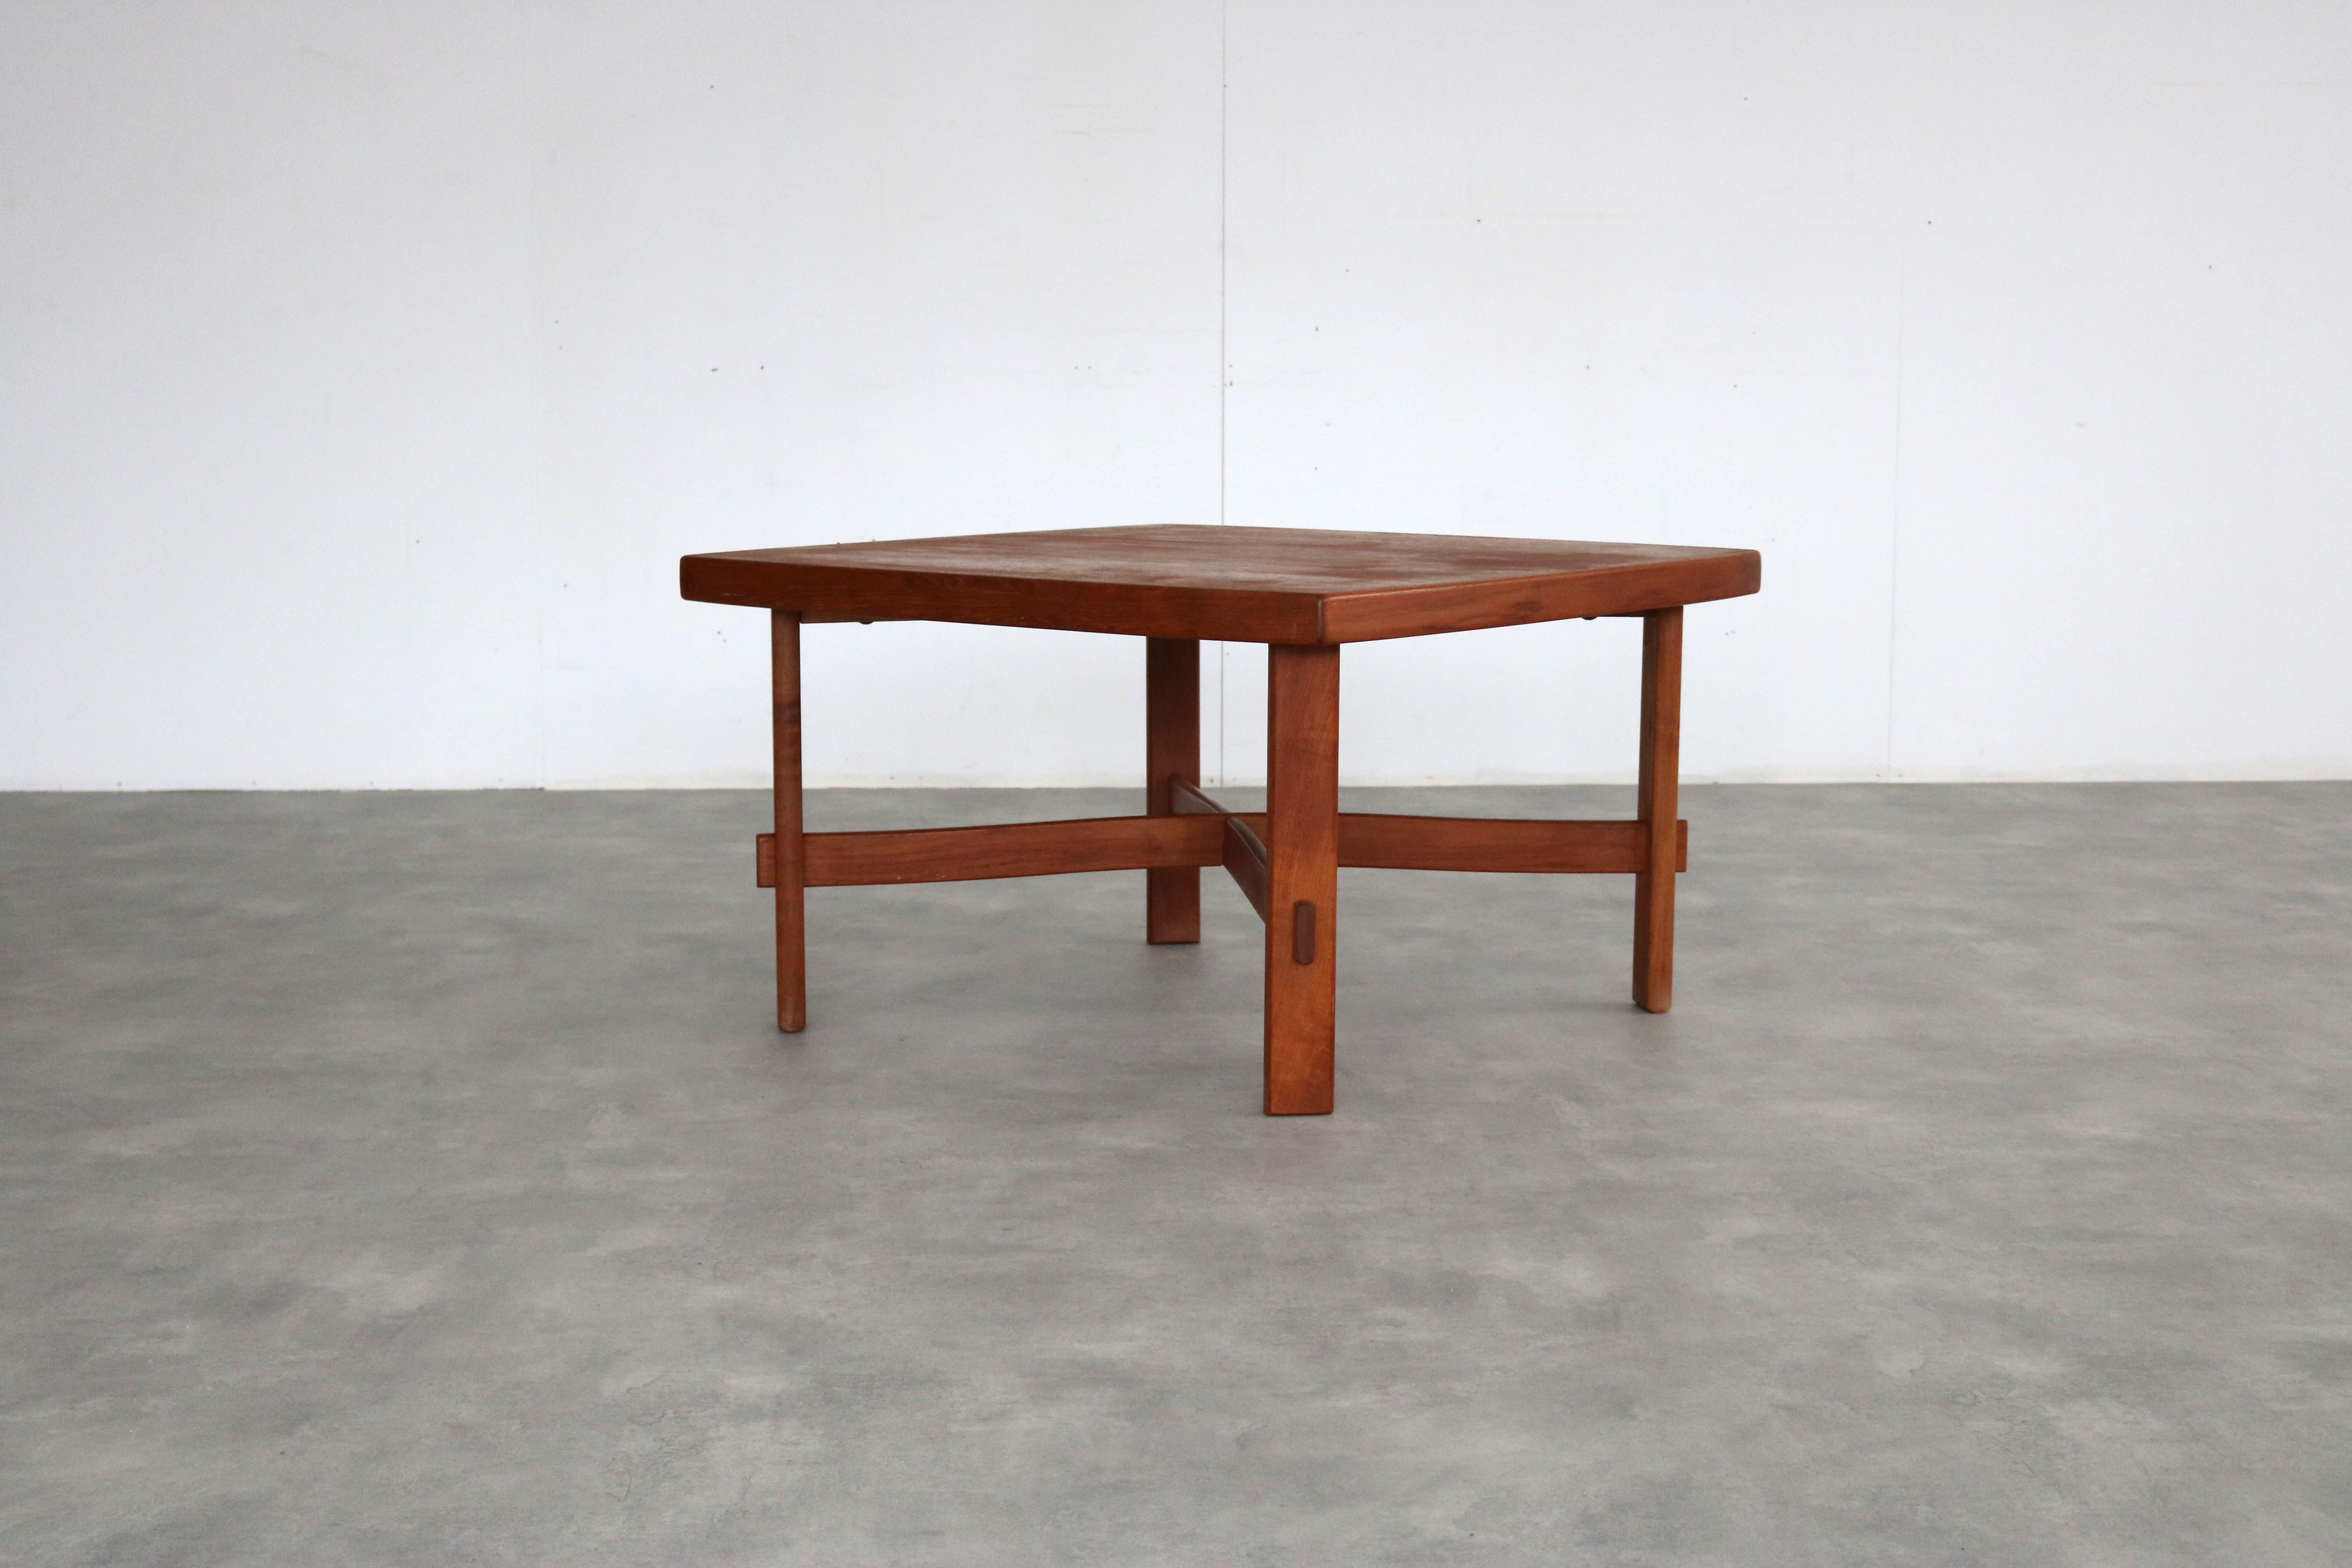 vintage coffee table | table | teak | 60's

period | 60's
design | Alberts | Tibro | Sweden
condition | good | light signs of use
size | 55 x 95 x 95 (hxwxd)

details | teak;

article number | 2248